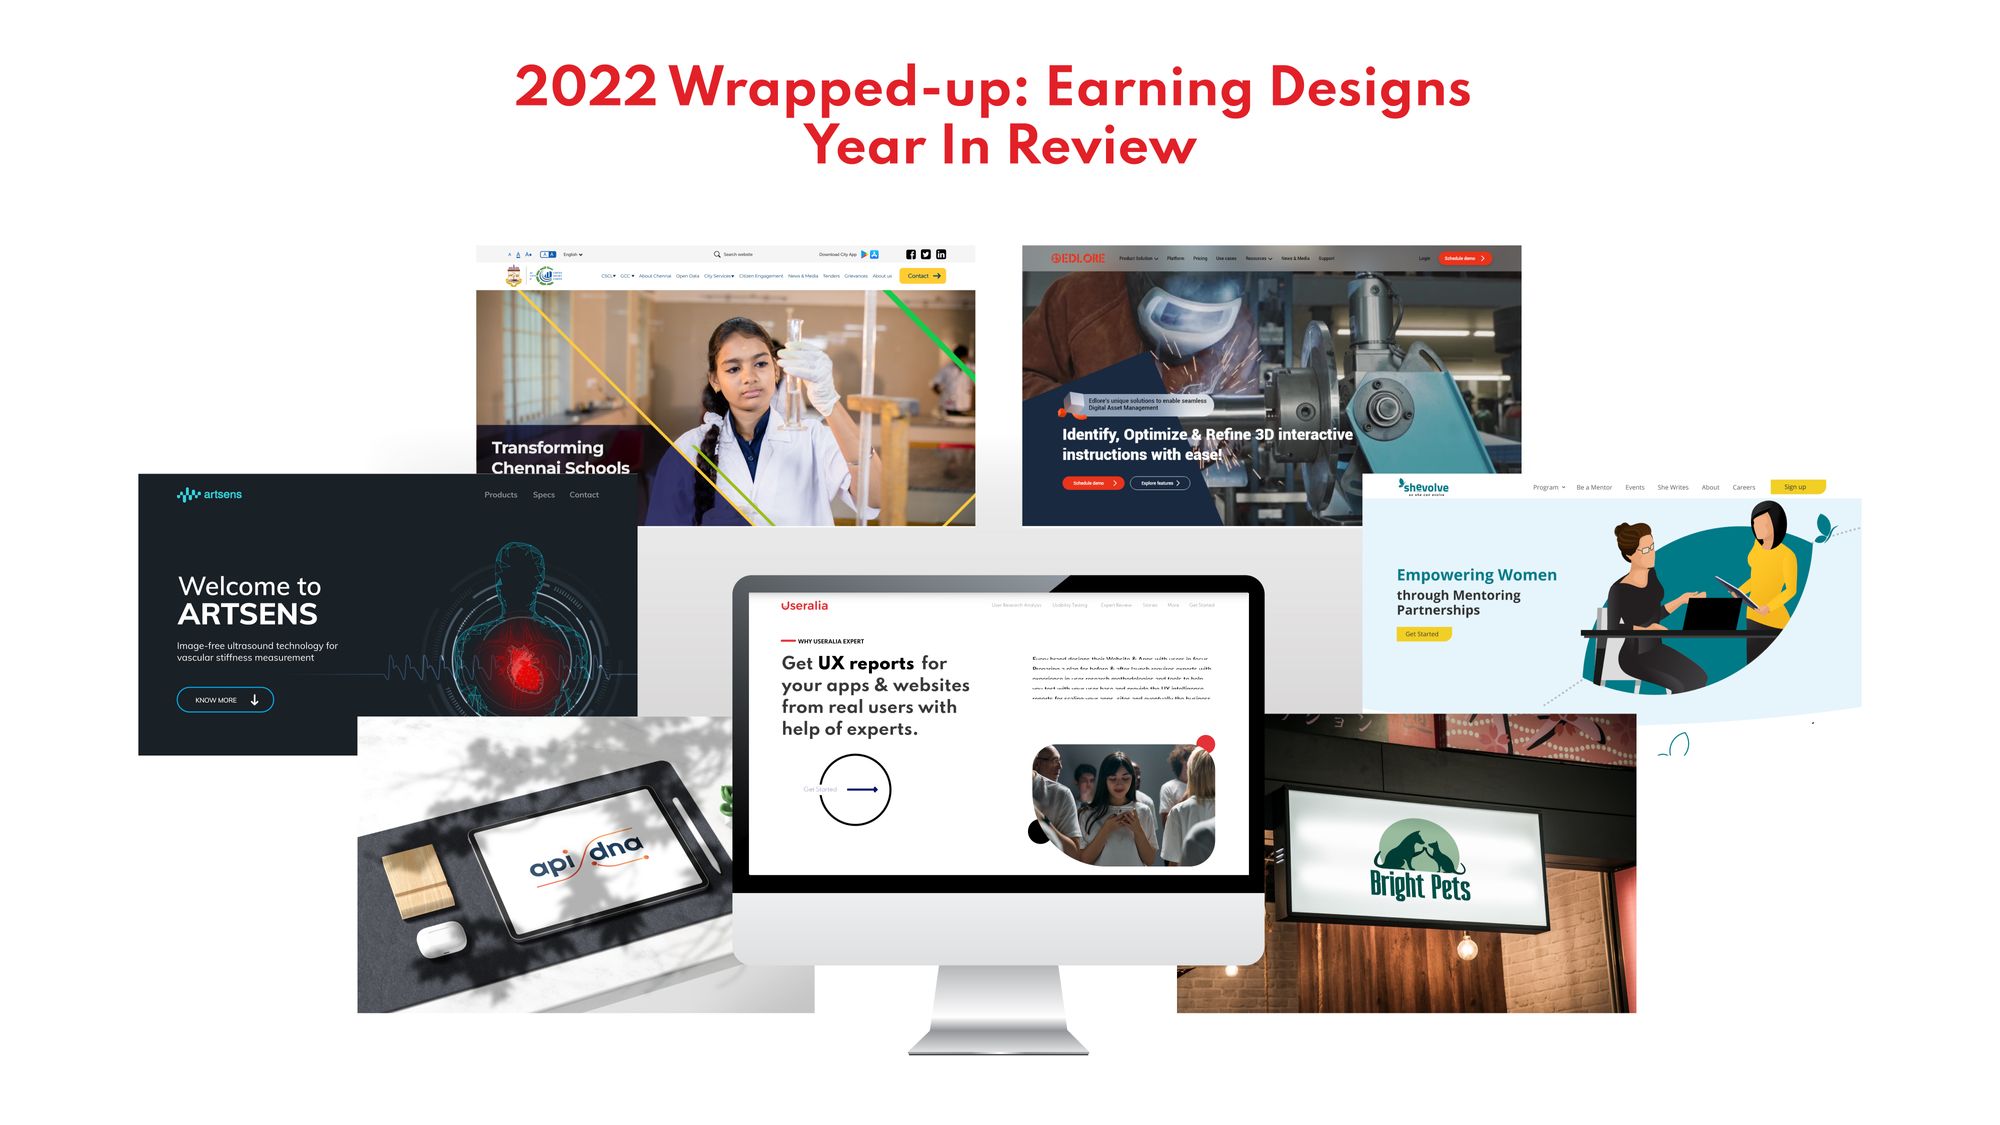 2022 Wrapped-up: Exdera (Formerly Earning Designs) Year-in-Review